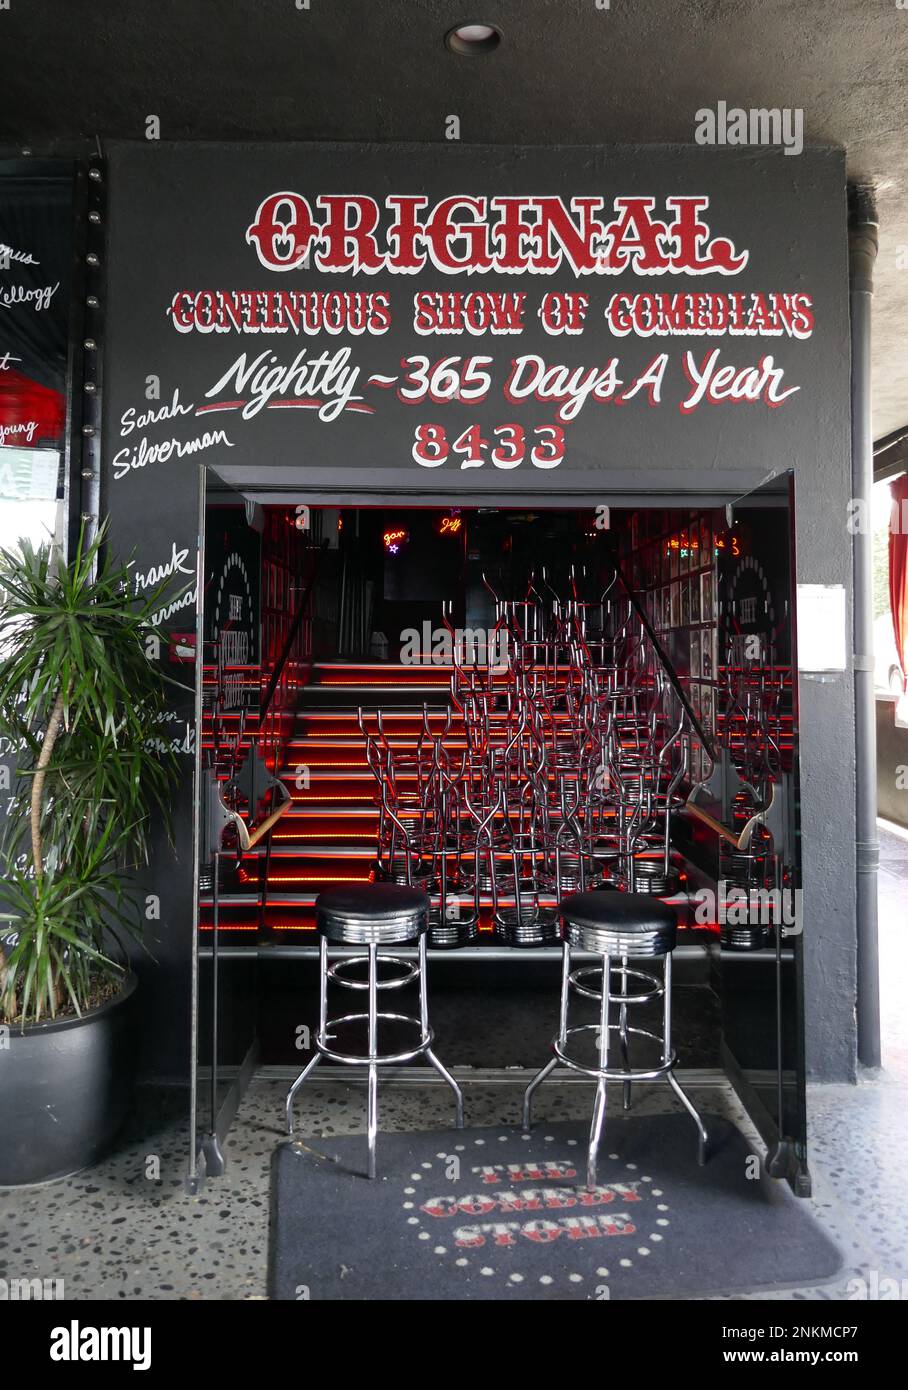 West Hollywood, California, USA 22nd February 2023 The Comedy Store on Sunset Blvd on February 22, 2023 in West Hollywood, California, USA. Photo by Barry King/Alamy Stock Photo Stock Photo